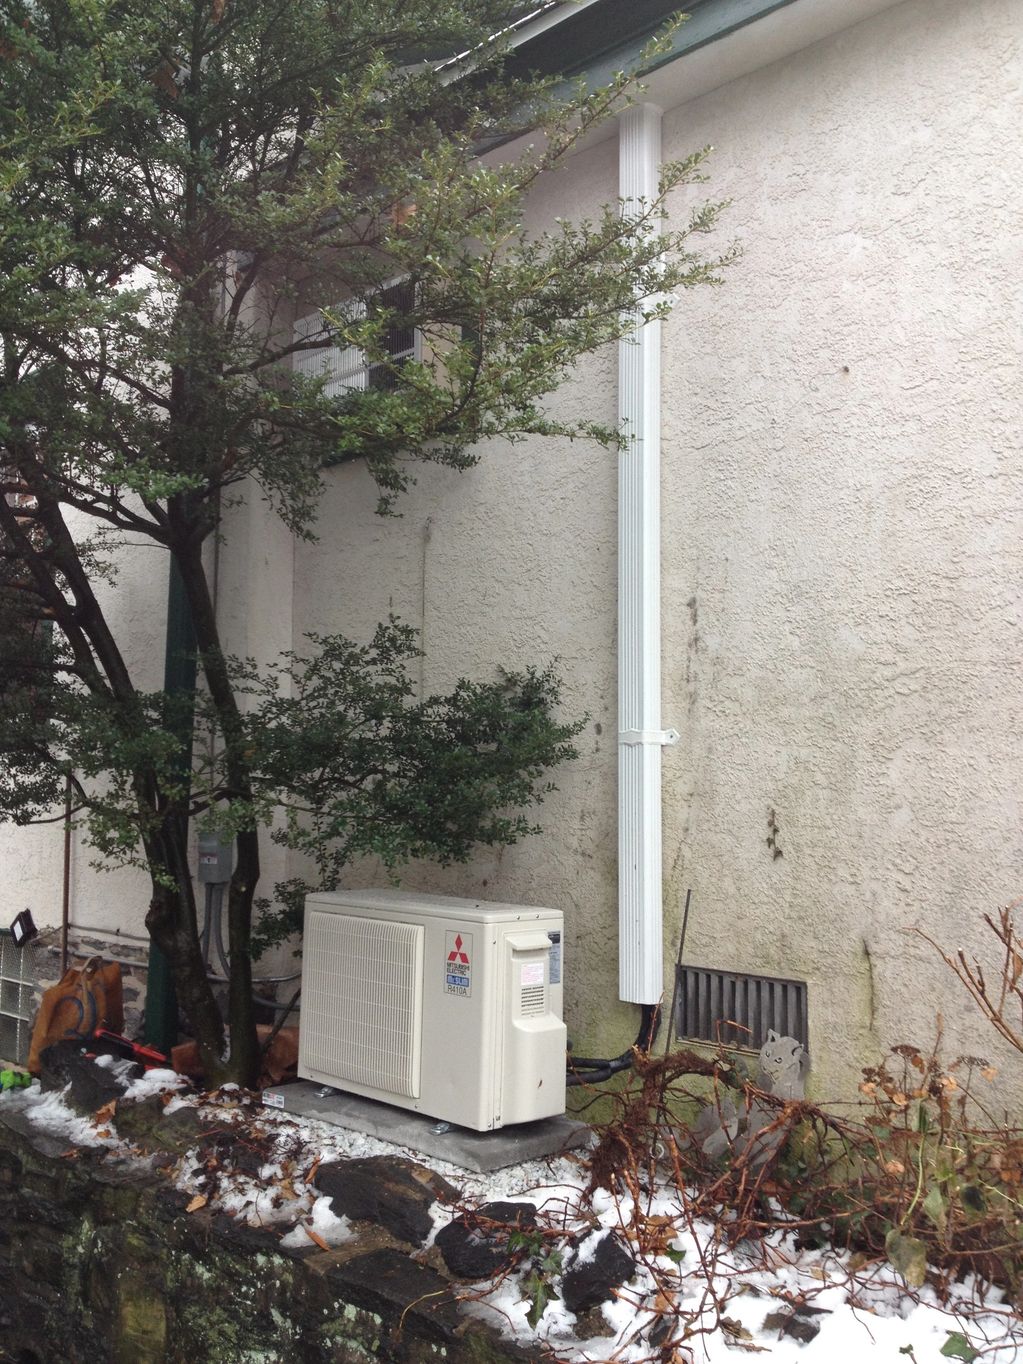 Mini Split Outdoor Heat Pump with covered exterior lines